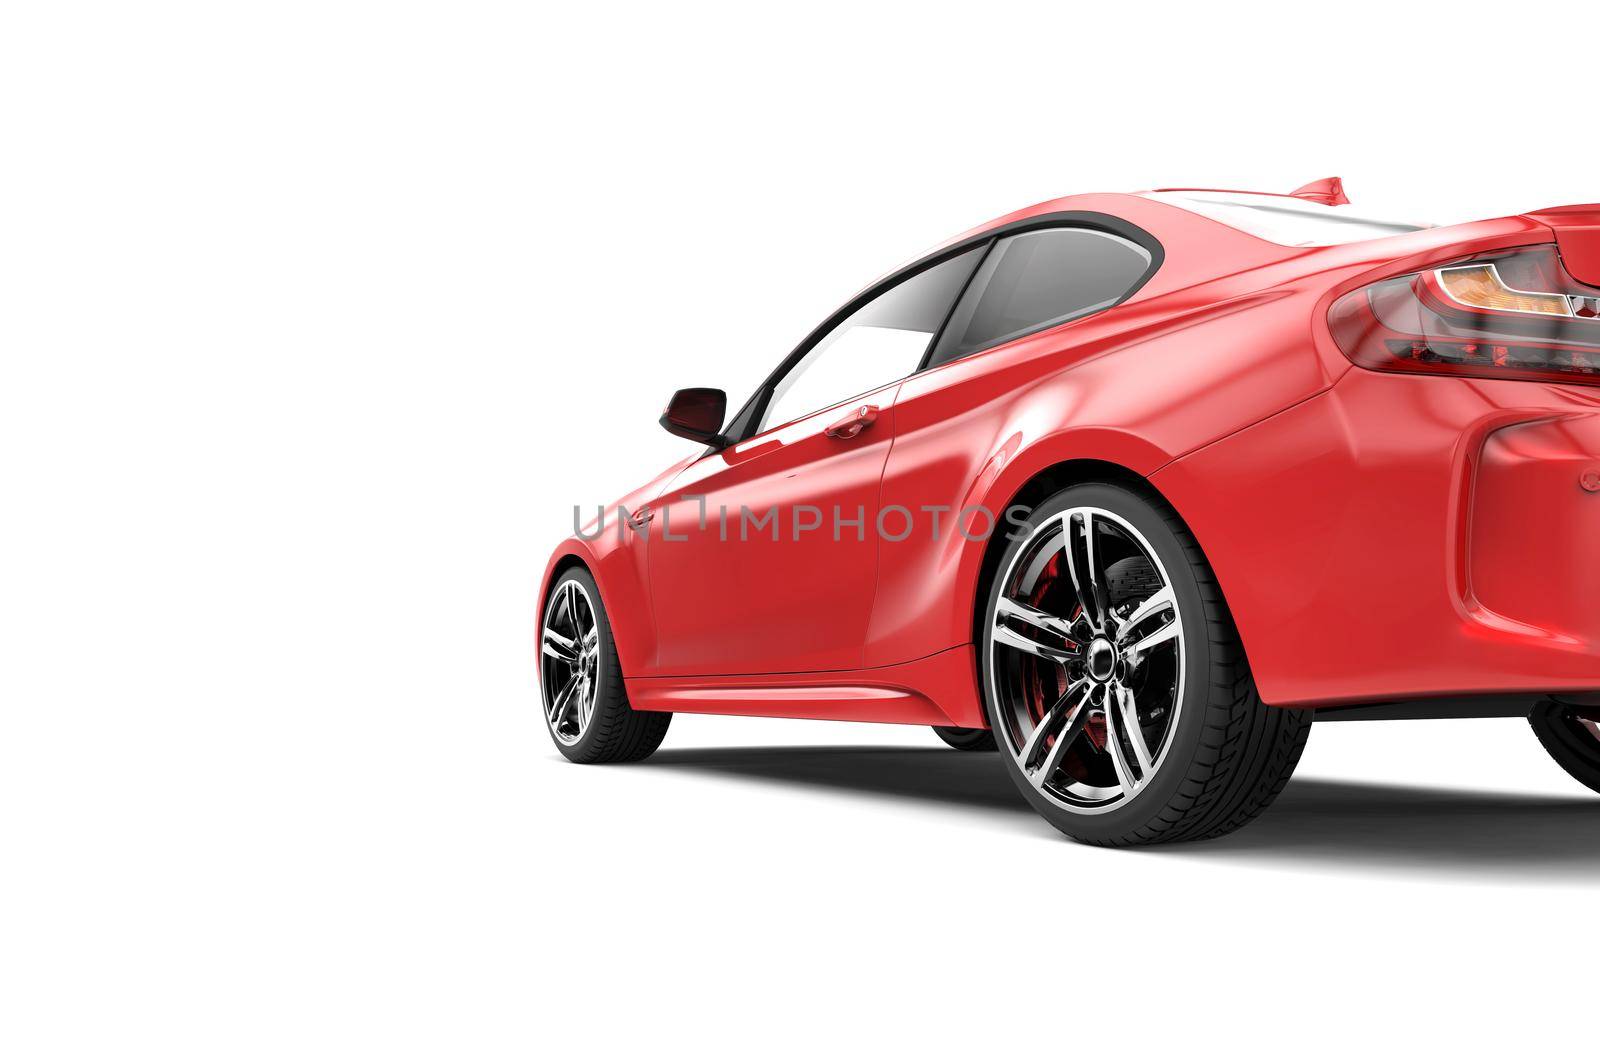 Back of a red luxury car isolated on a white background: 3D rendering by cla78